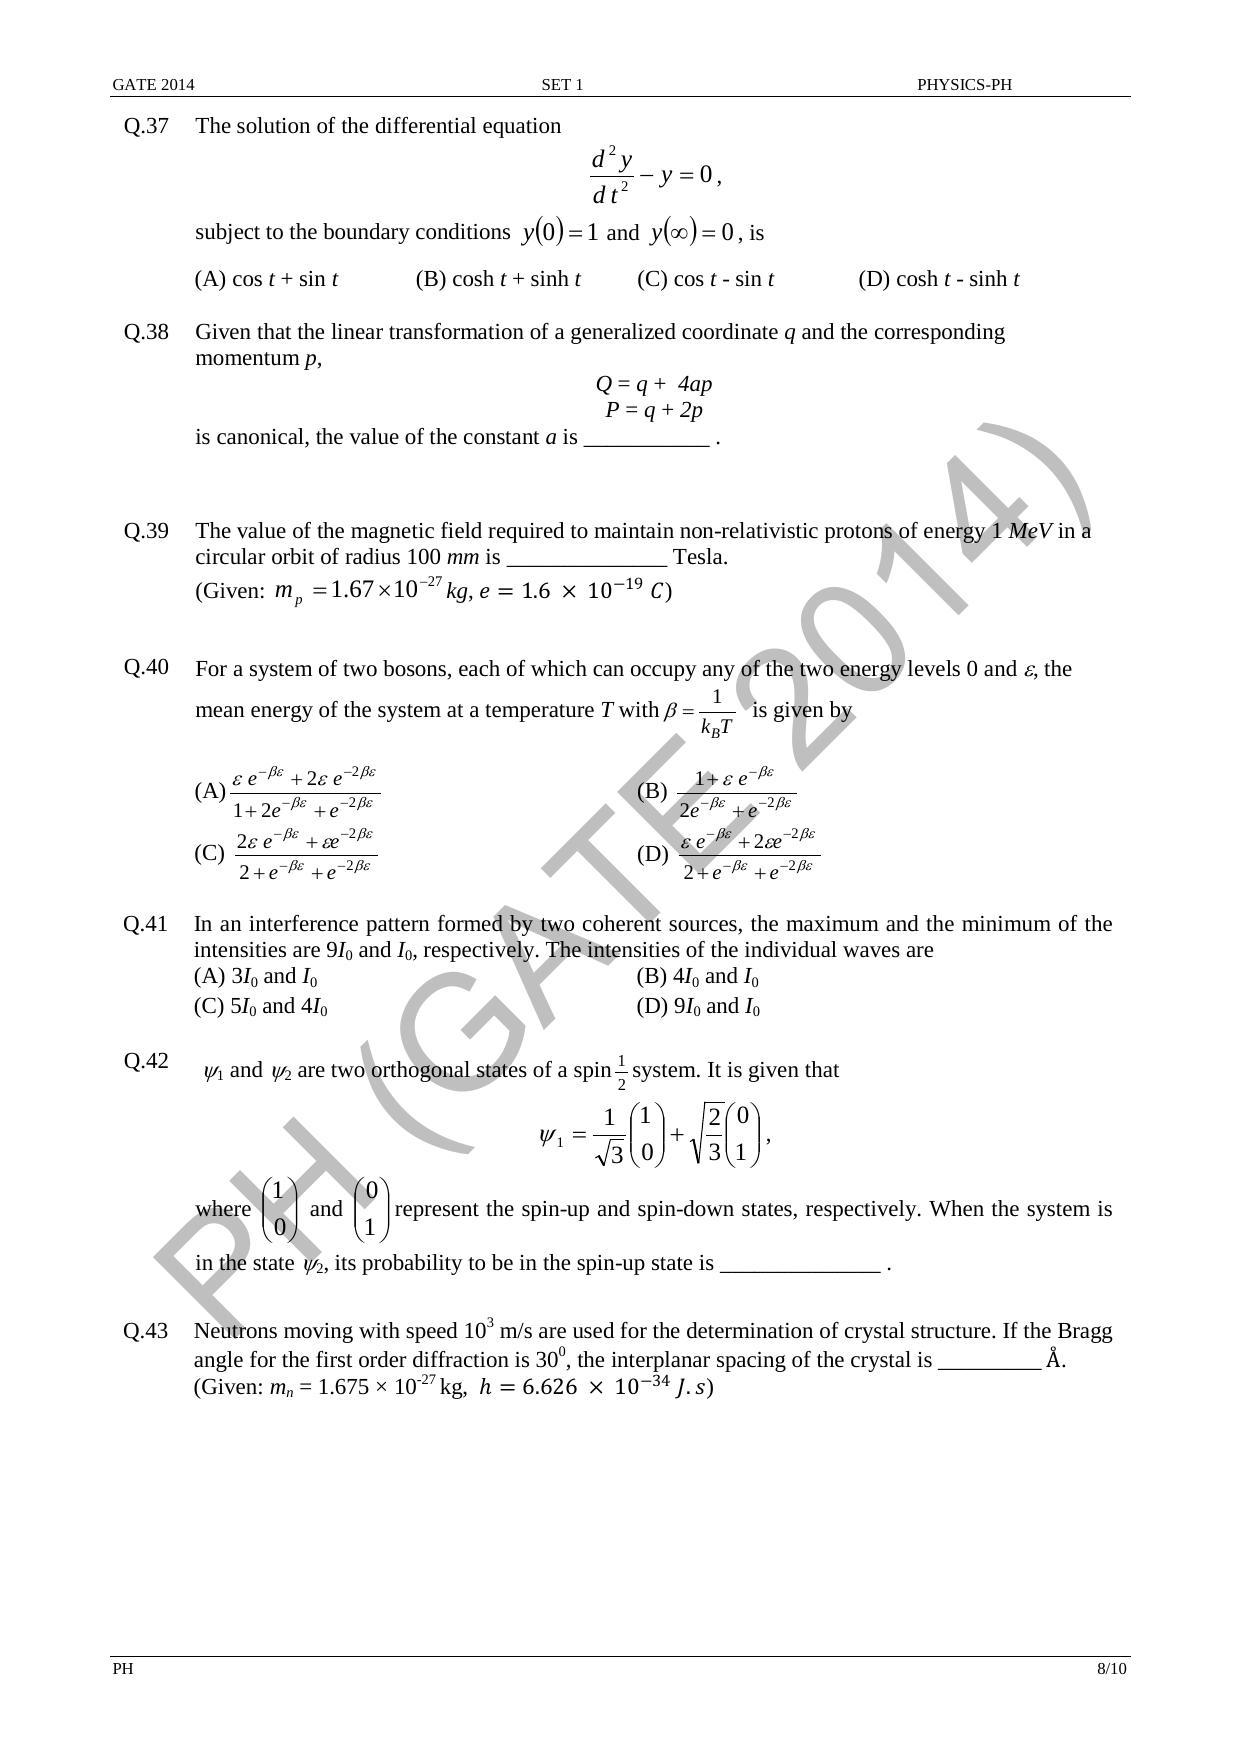 GATE 2014 Physics (PH) Question Paper with Answer Key - Page 15